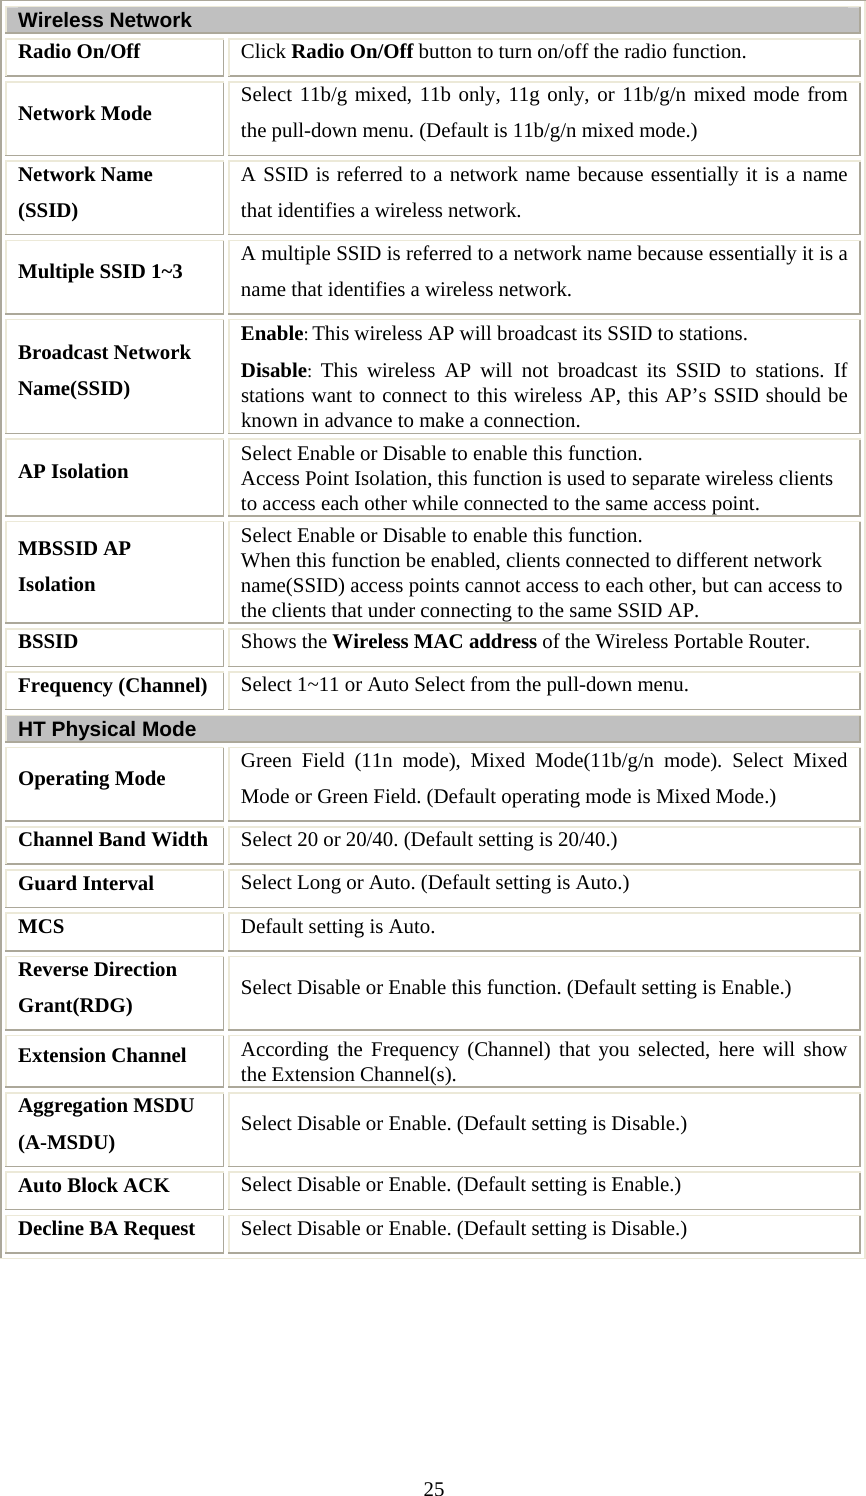   25Wireless Network Radio On/Off  Click Radio On/Off button to turn on/off the radio function. Network Mode  Select 11b/g mixed, 11b only, 11g only, or 11b/g/n mixed mode from the pull-down menu. (Default is 11b/g/n mixed mode.) Network Name (SSID) A SSID is referred to a network name because essentially it is a name that identifies a wireless network. Multiple SSID 1~3  A multiple SSID is referred to a network name because essentially it is a name that identifies a wireless network. Broadcast Network Name(SSID) Enable: This wireless AP will broadcast its SSID to stations.  Disable: This wireless AP will not broadcast its SSID to stations. If stations want to connect to this wireless AP, this AP’s SSID should be known in advance to make a connection. AP Isolation  Select Enable or Disable to enable this function. Access Point Isolation, this function is used to separate wireless clients to access each other while connected to the same access point.  MBSSID AP Isolation Select Enable or Disable to enable this function. When this function be enabled, clients connected to different network name(SSID) access points cannot access to each other, but can access to the clients that under connecting to the same SSID AP.  BSSID   Shows the Wireless MAC address of the Wireless Portable Router. Frequency (Channel)  Select 1~11 or Auto Select from the pull-down menu. HT Physical Mode Operating Mode  Green Field (11n mode), Mixed Mode(11b/g/n mode). Select Mixed Mode or Green Field. (Default operating mode is Mixed Mode.) Channel Band Width  Select 20 or 20/40. (Default setting is 20/40.) Guard Interval  Select Long or Auto. (Default setting is Auto.) MCS  Default setting is Auto. Reverse Direction Grant(RDG)  Select Disable or Enable this function. (Default setting is Enable.) Extension Channel  According the Frequency (Channel) that you selected, here will show the Extension Channel(s). Aggregation MSDU (A-MSDU)  Select Disable or Enable. (Default setting is Disable.) Auto Block ACK  Select Disable or Enable. (Default setting is Enable.) Decline BA Request  Select Disable or Enable. (Default setting is Disable.)   